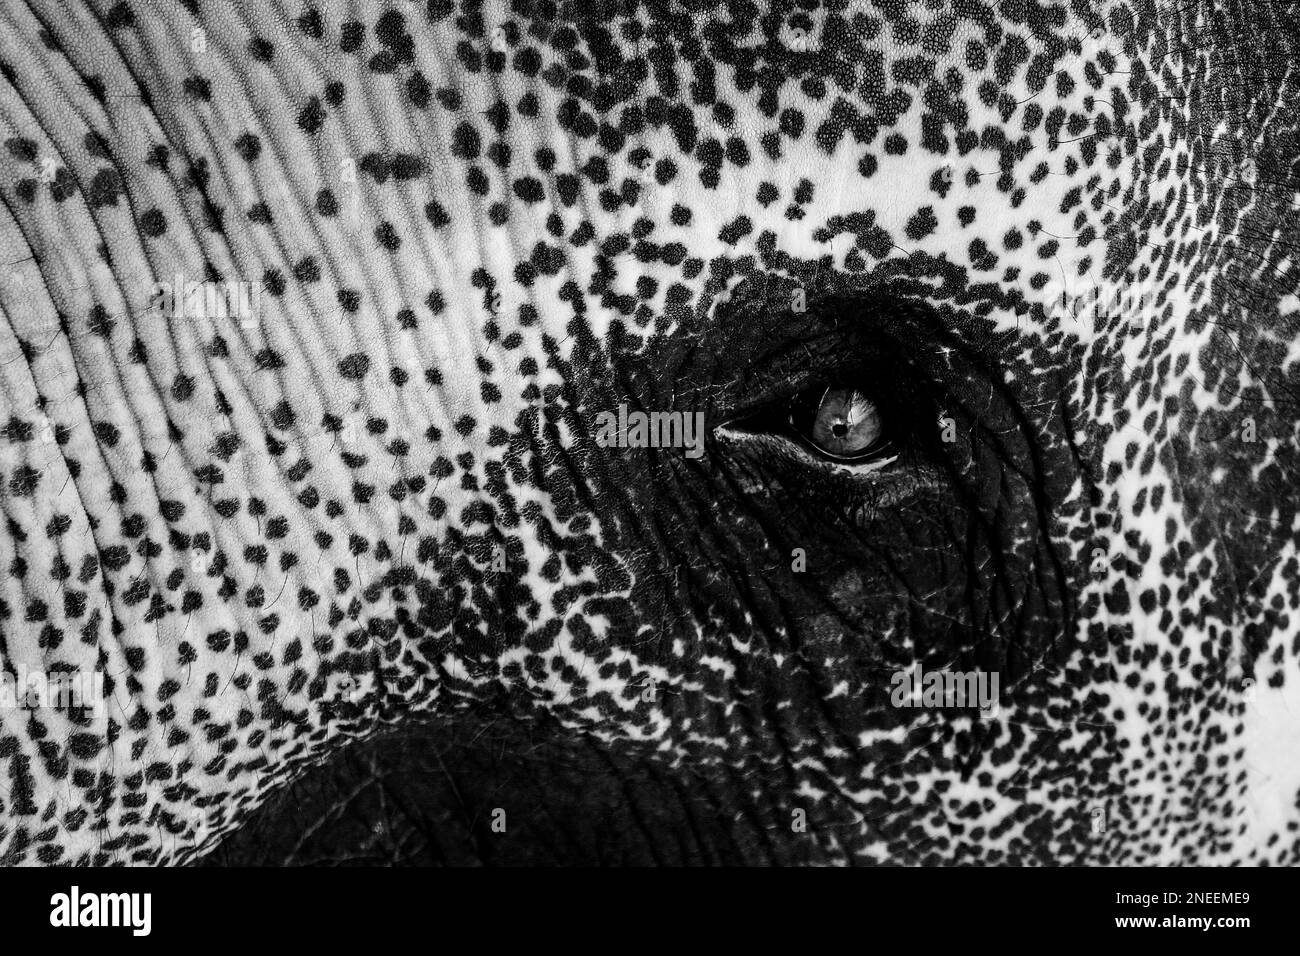 Wild African Elephant Head and Eye, detailed extreme macro close up view skin texture, abstract artistic composition in black and white, Stock Photo